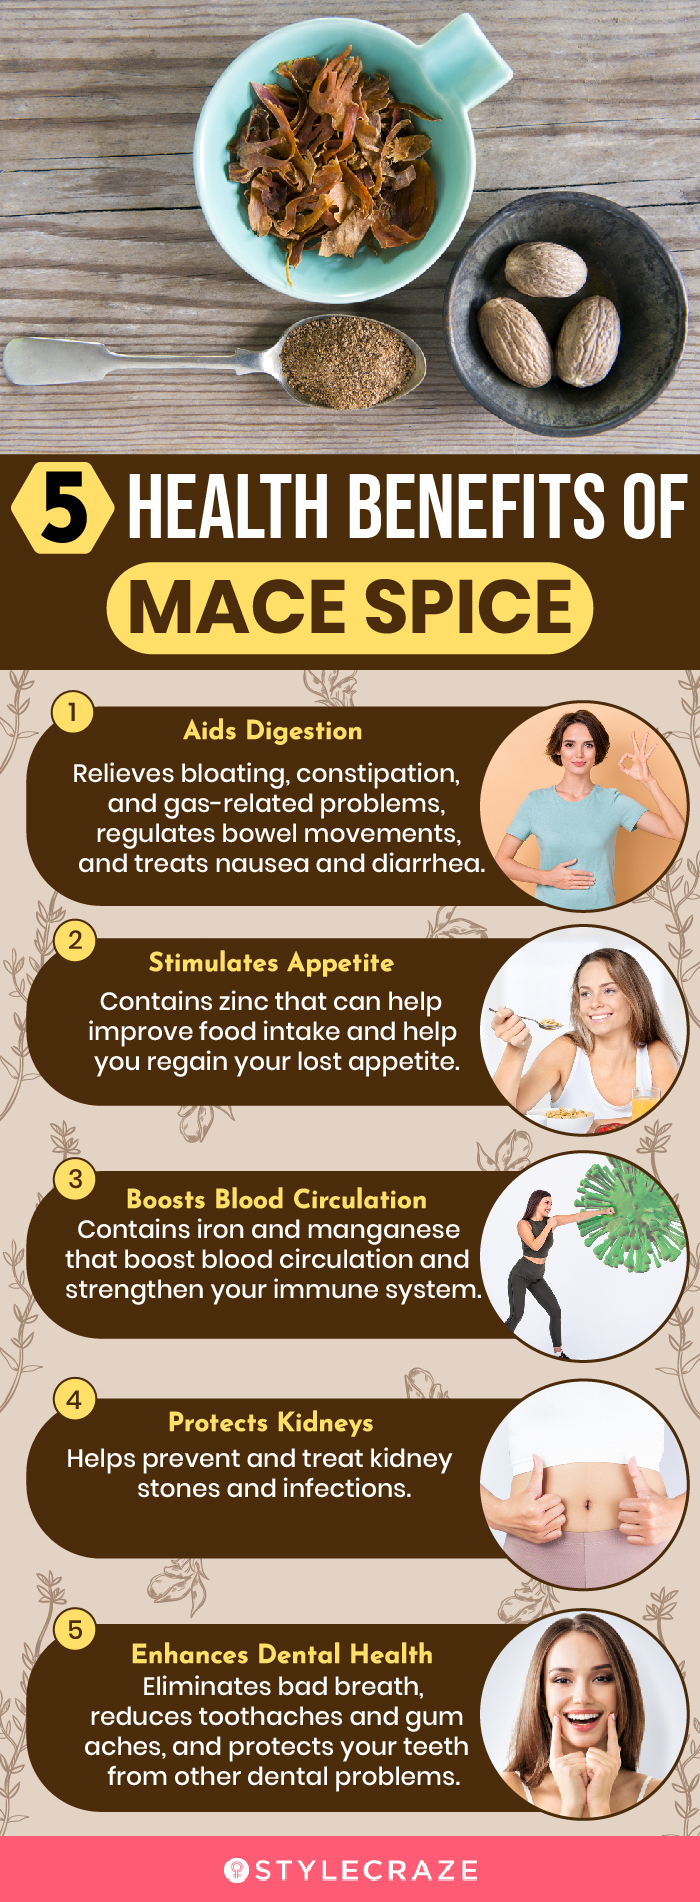 5 health benefits of mace spice (infographic)